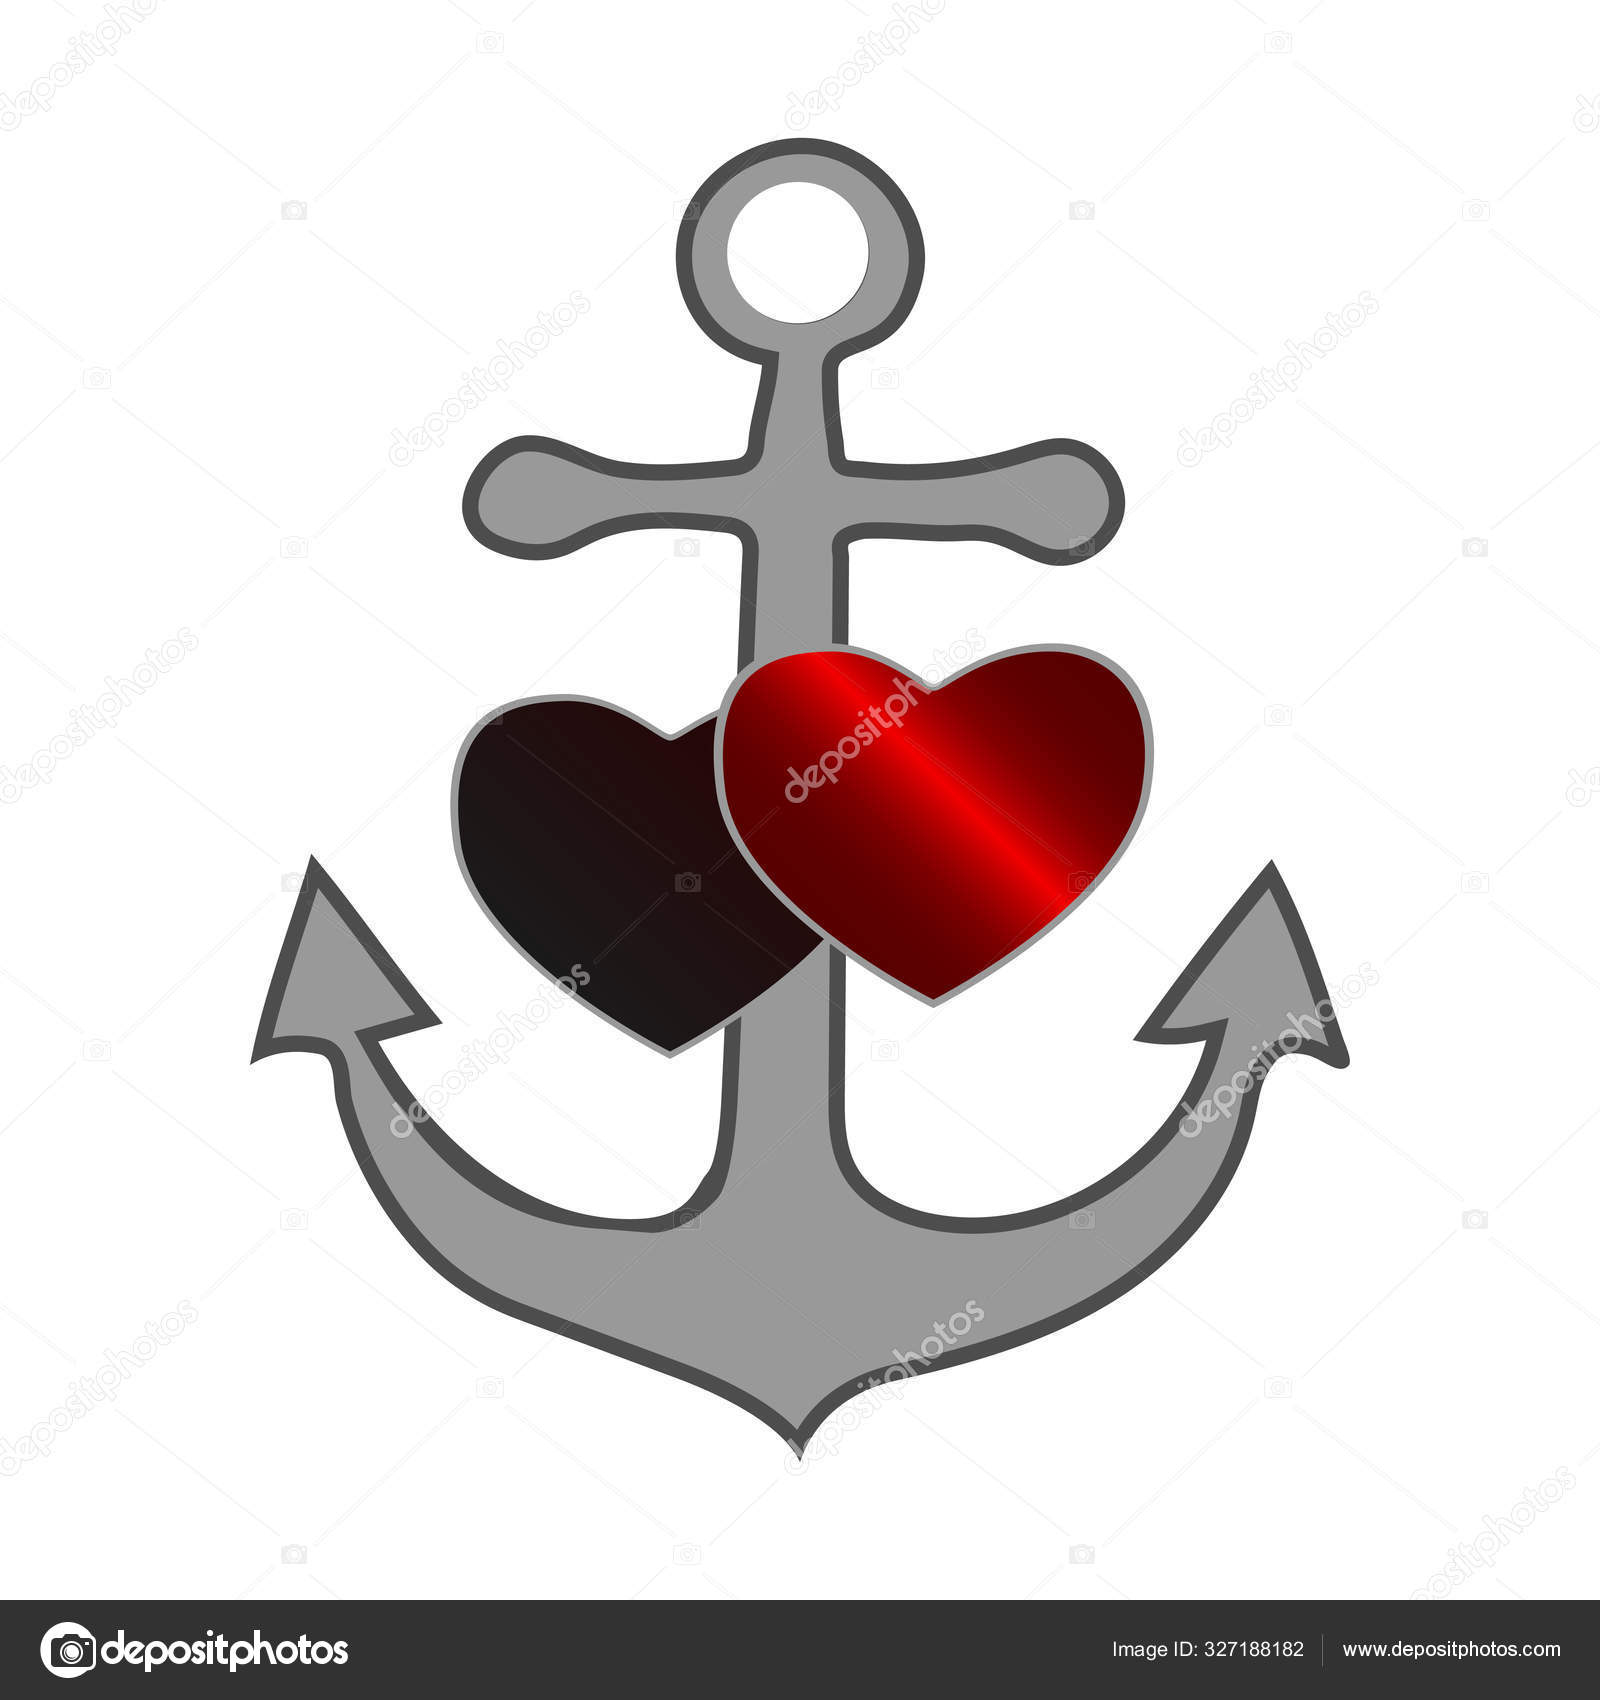 Gray sea anchor with a red and black heart symbolizing love and